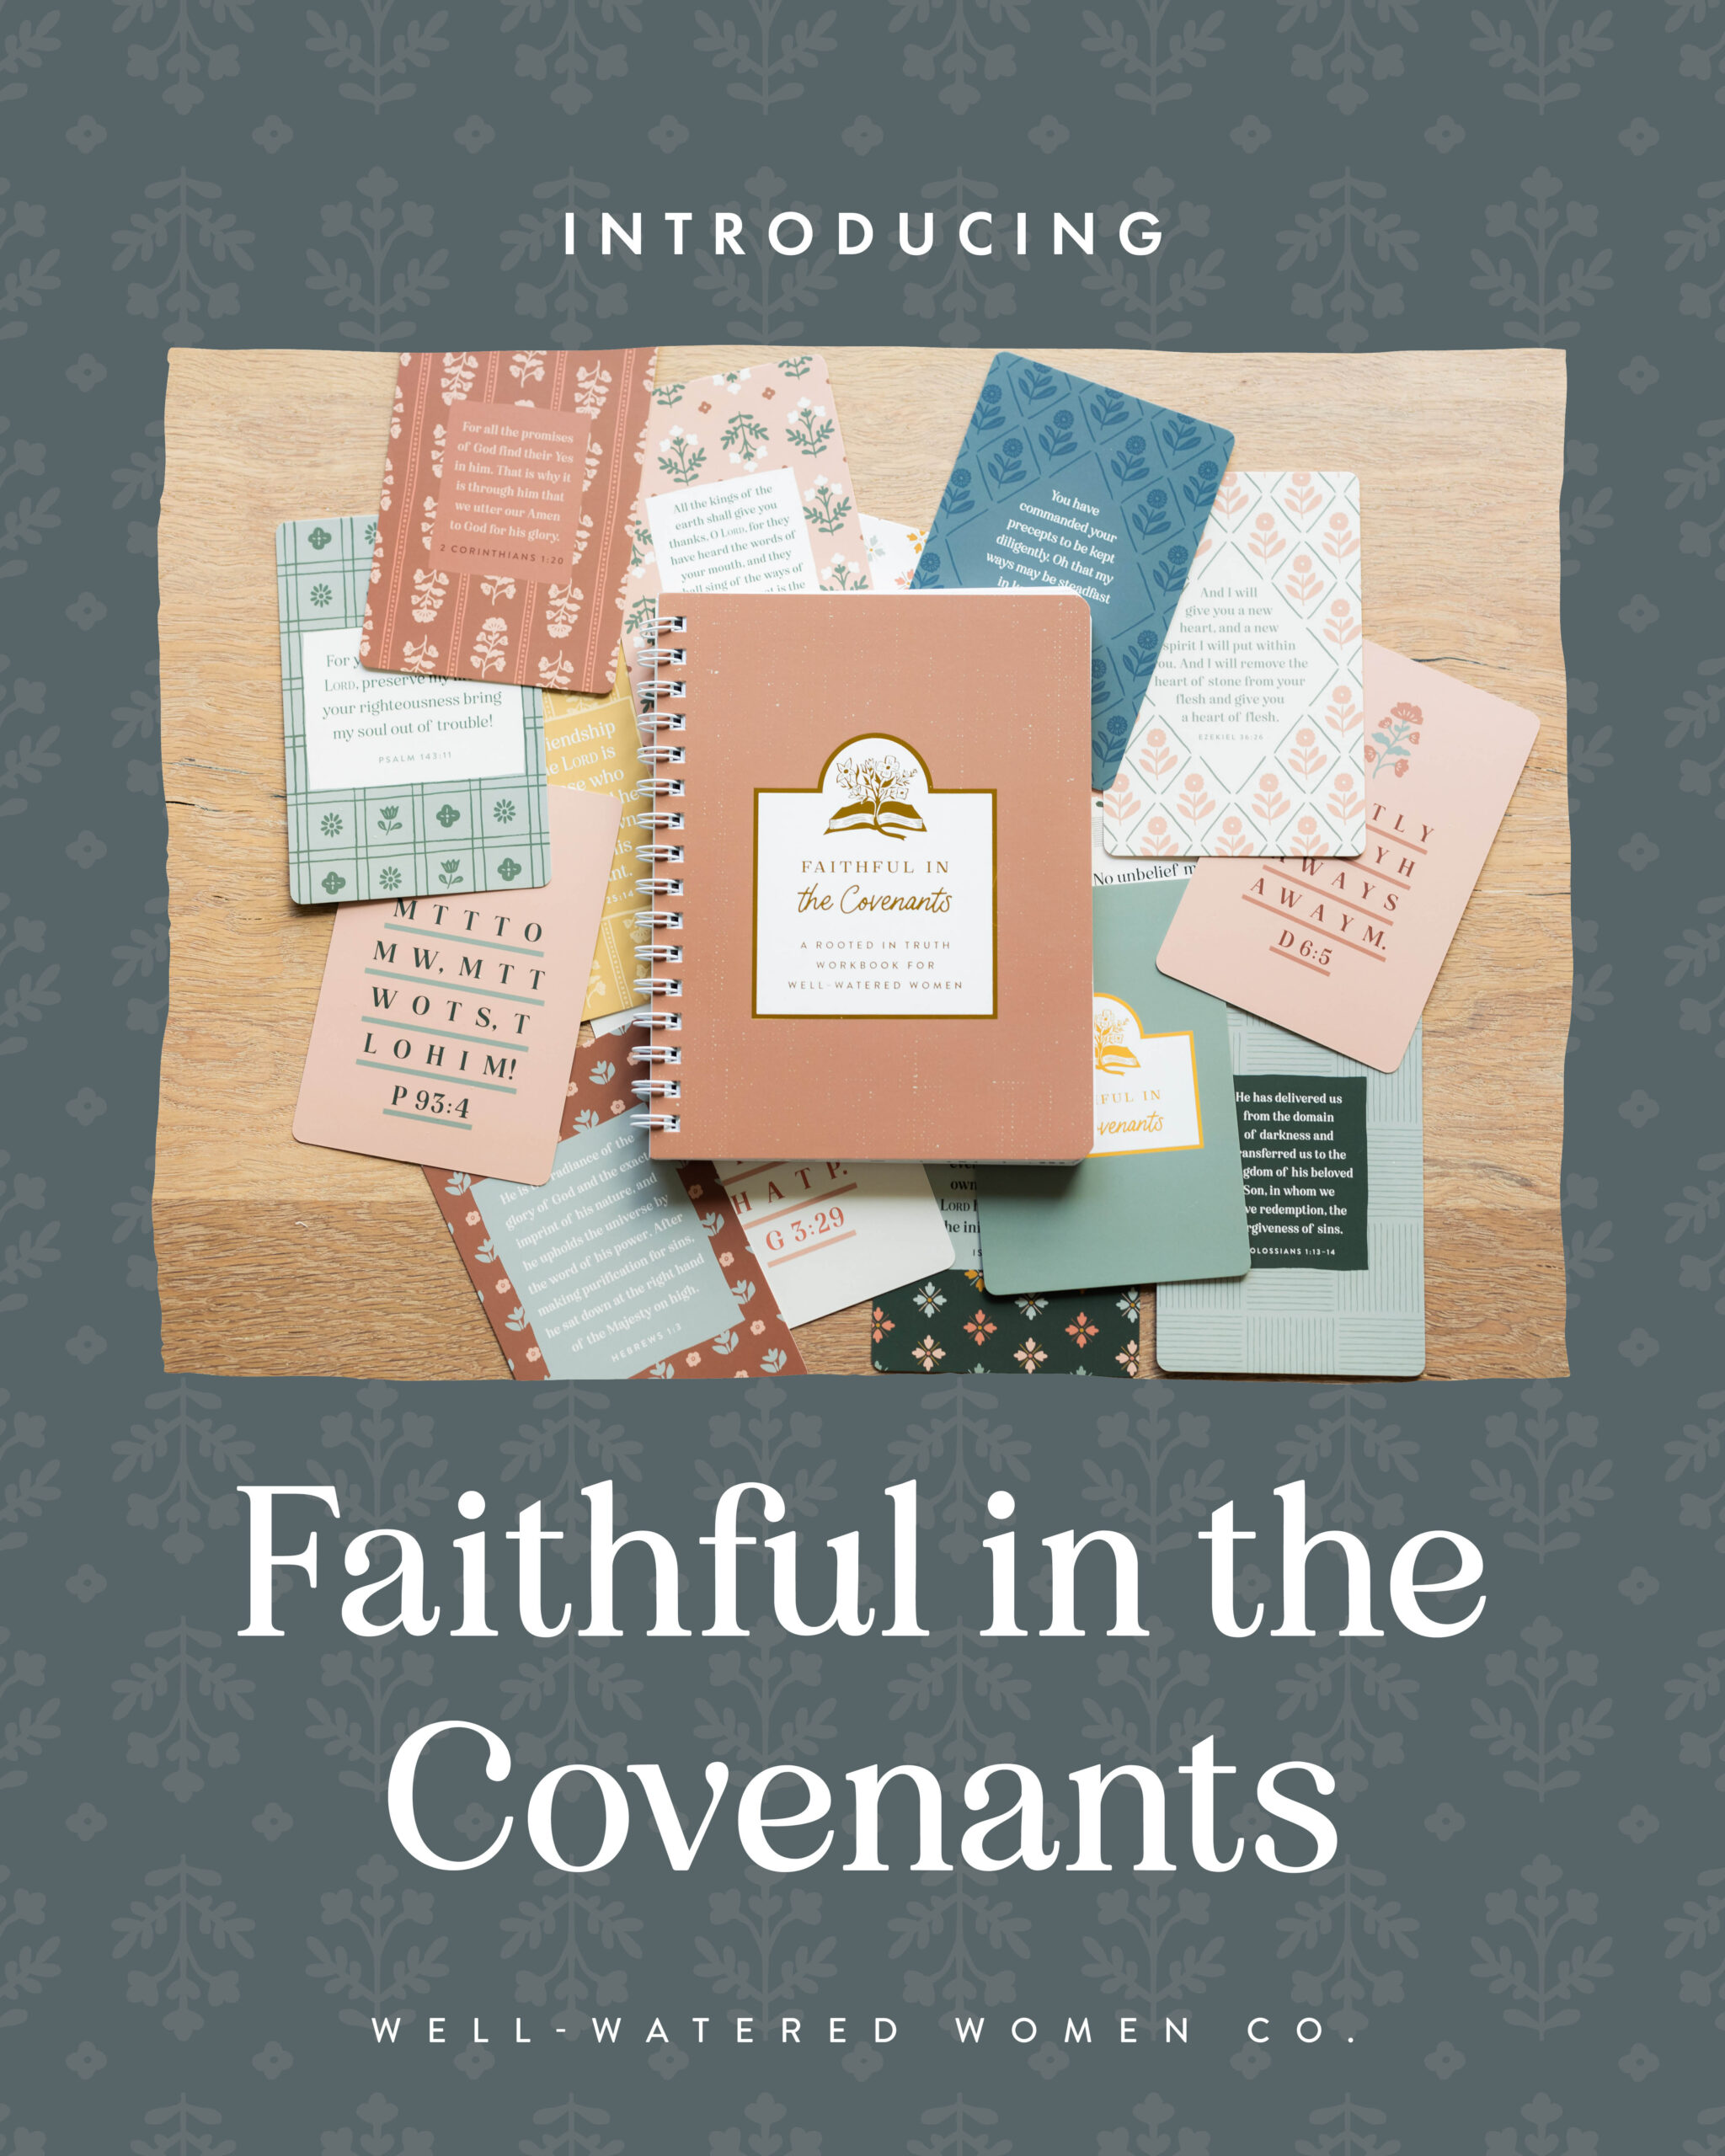 Introducing Faithful in the Covenants - an article from Well-Watered Women